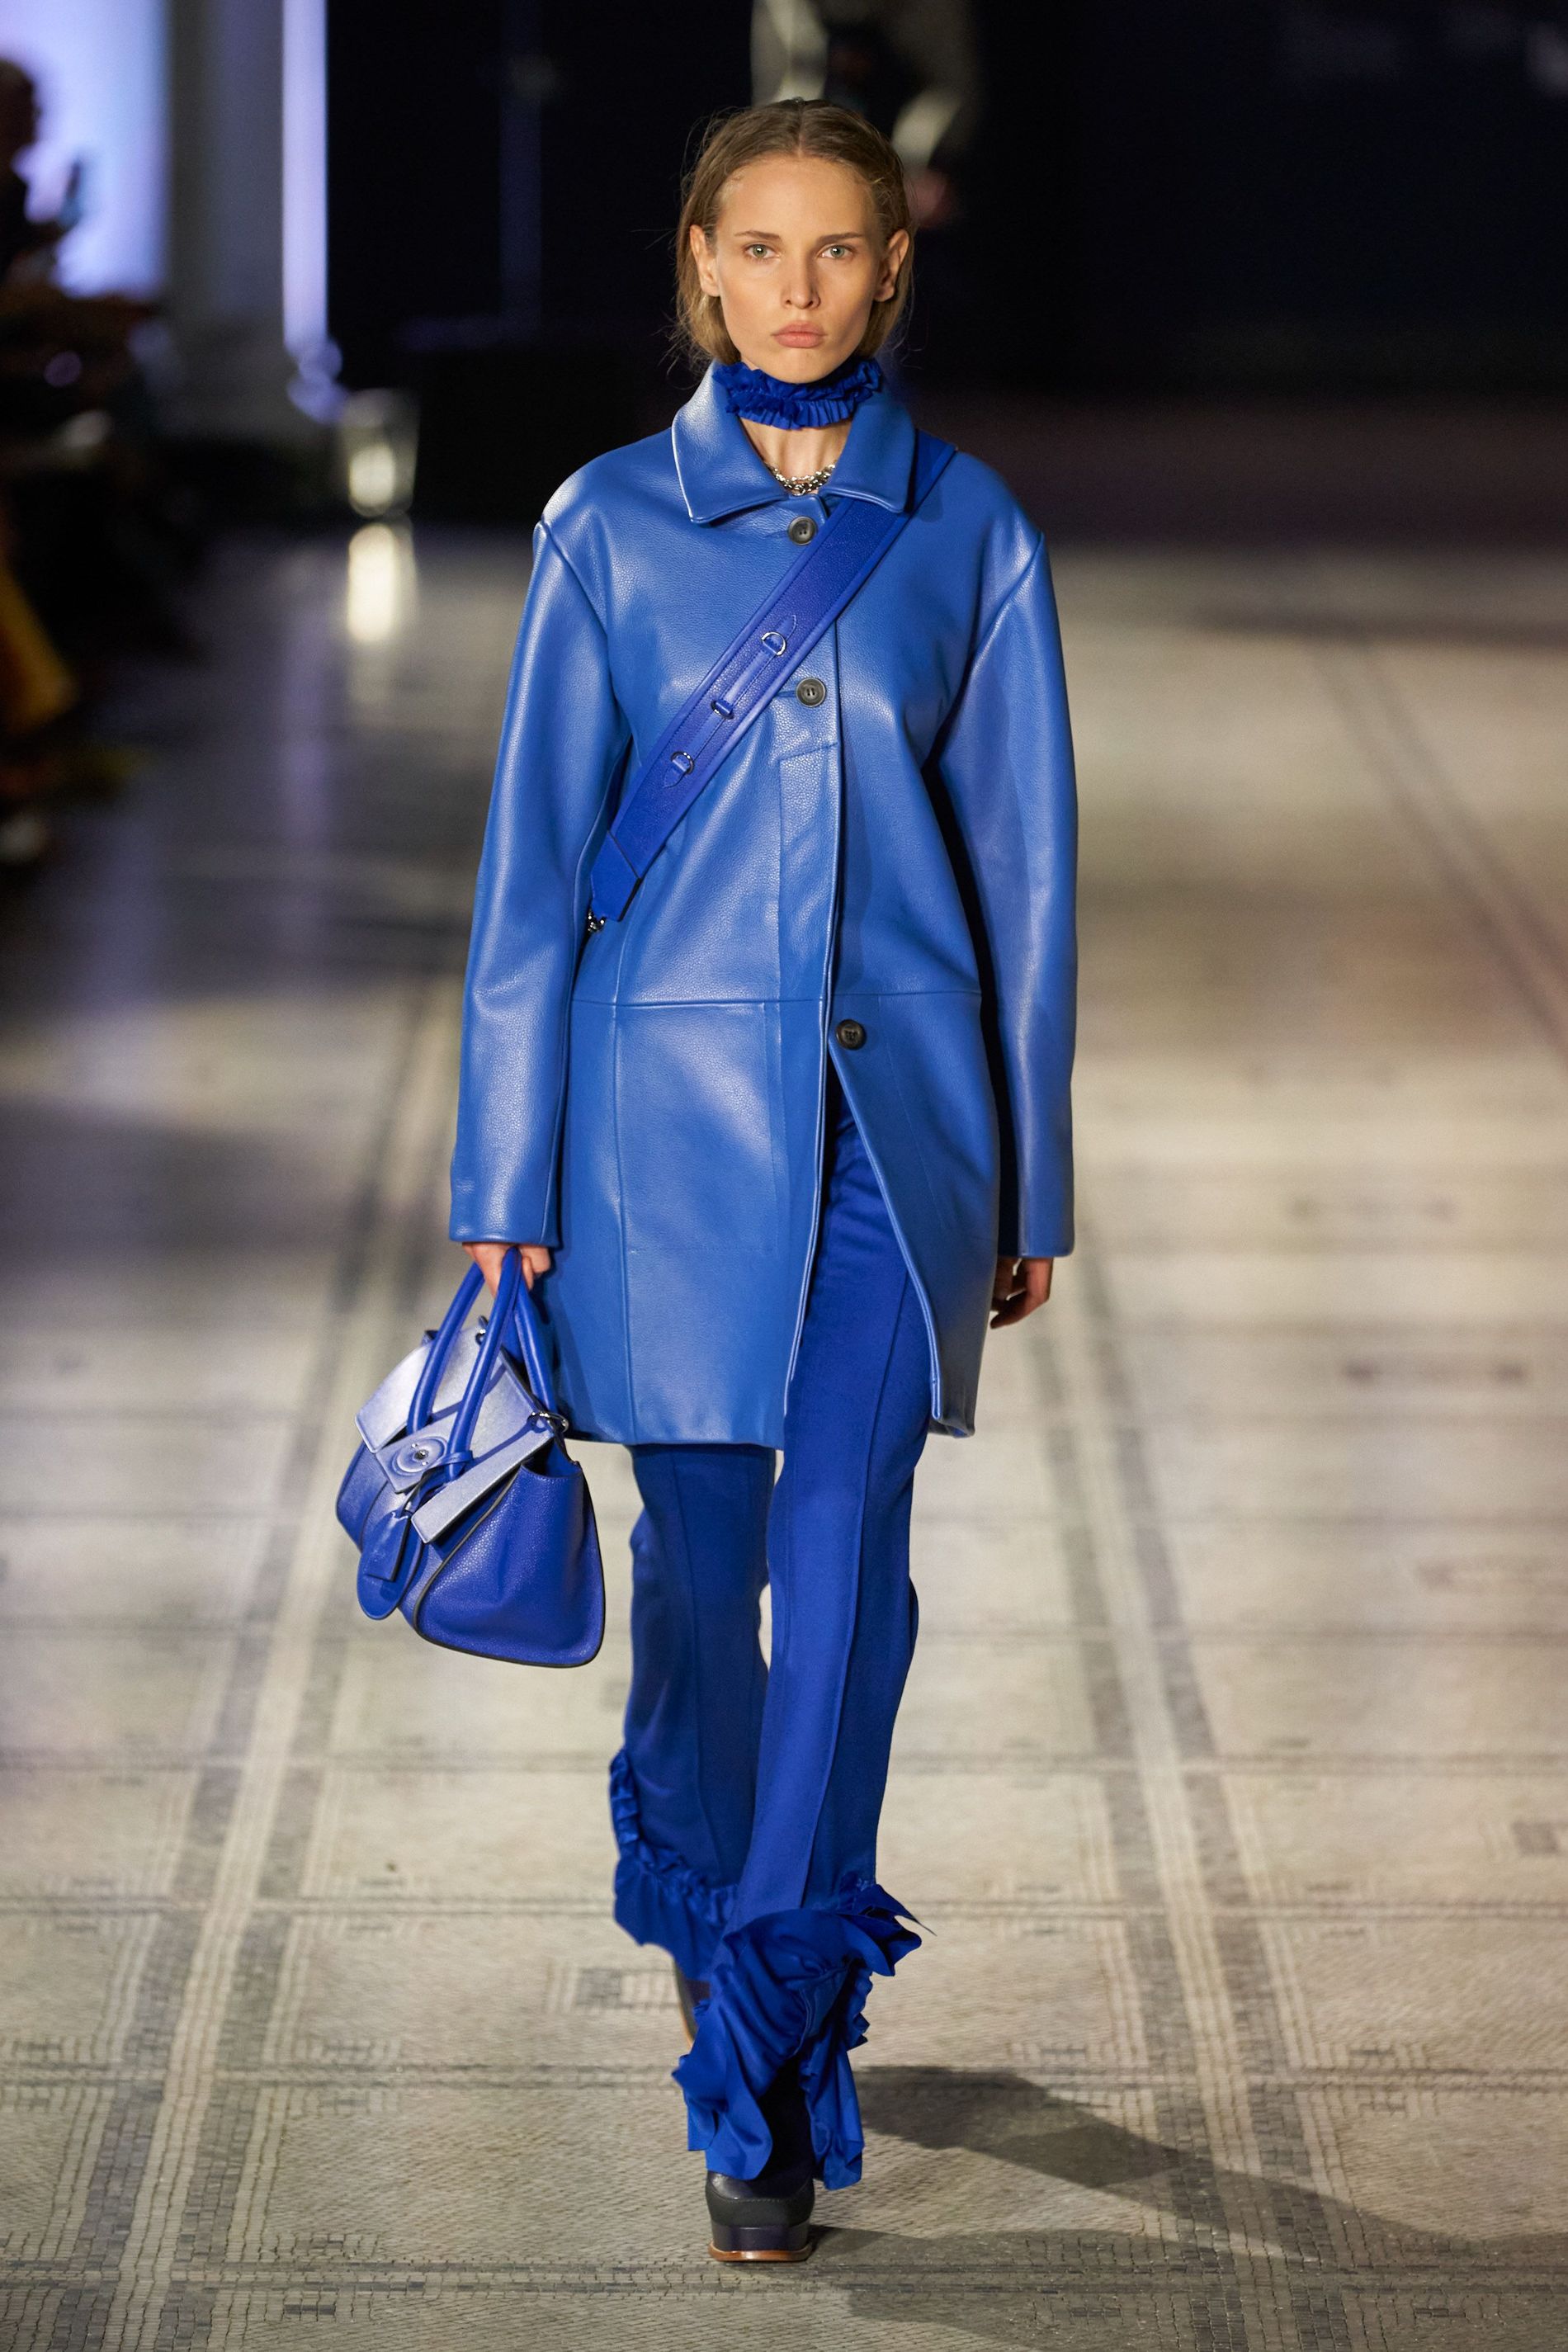 7 Top Trends From the London Spring 2022 Runways - Fashionista